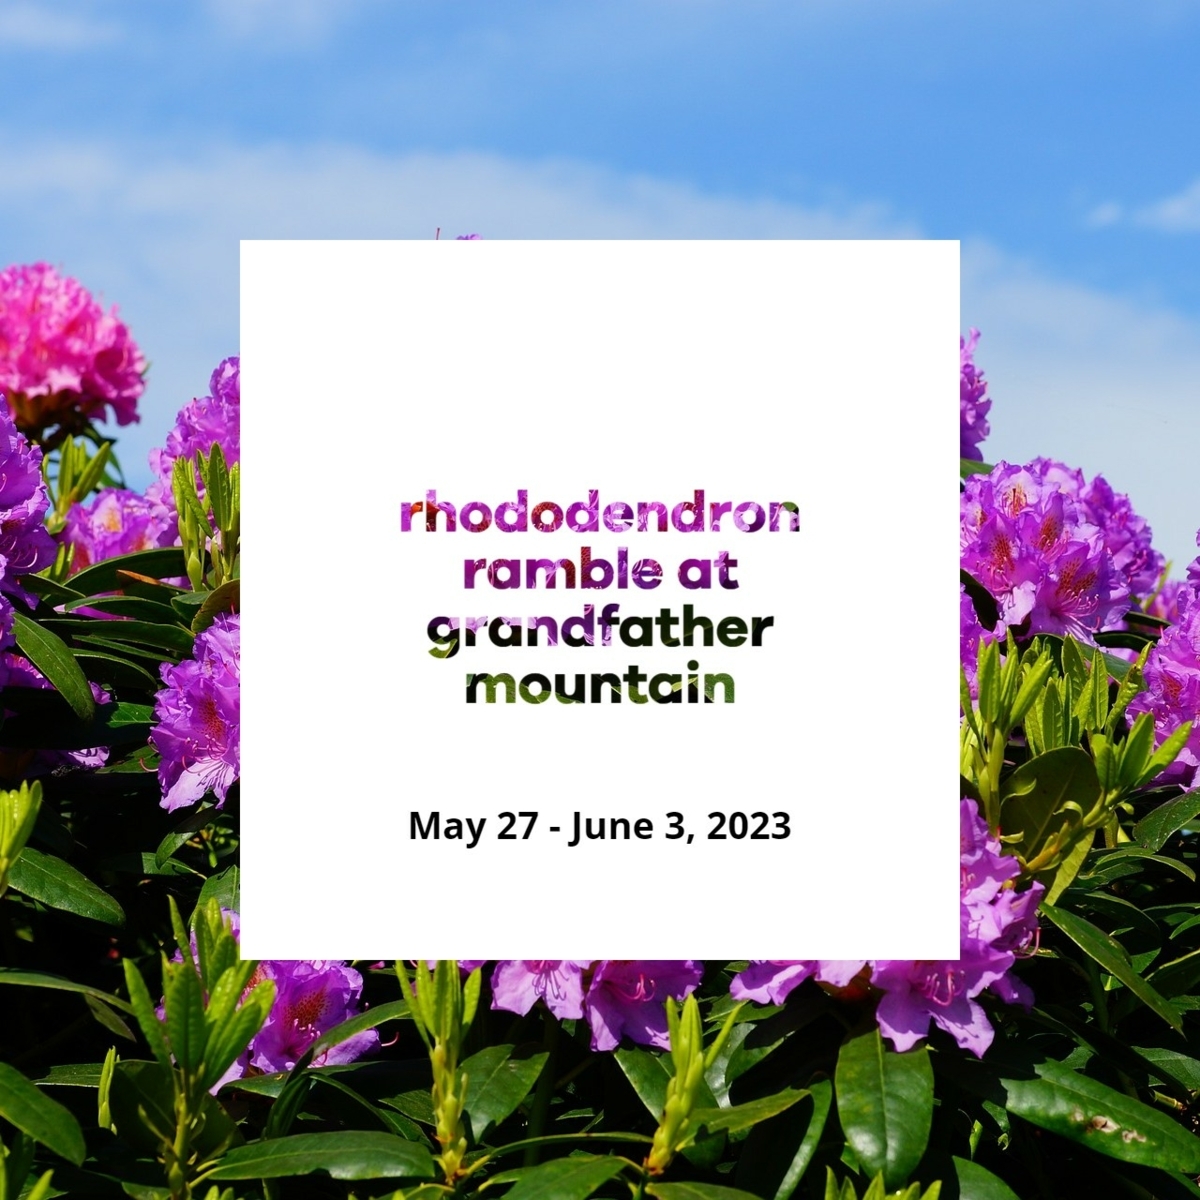 Take part in the Rhododendron Ramble at #GrandfatherMountain if you'll be here May 27-June 3.  Get out over #MemorialDay weekend and explore the beautiful mountains of North Carolina!  bit.ly/40VkAUy #blowingrock